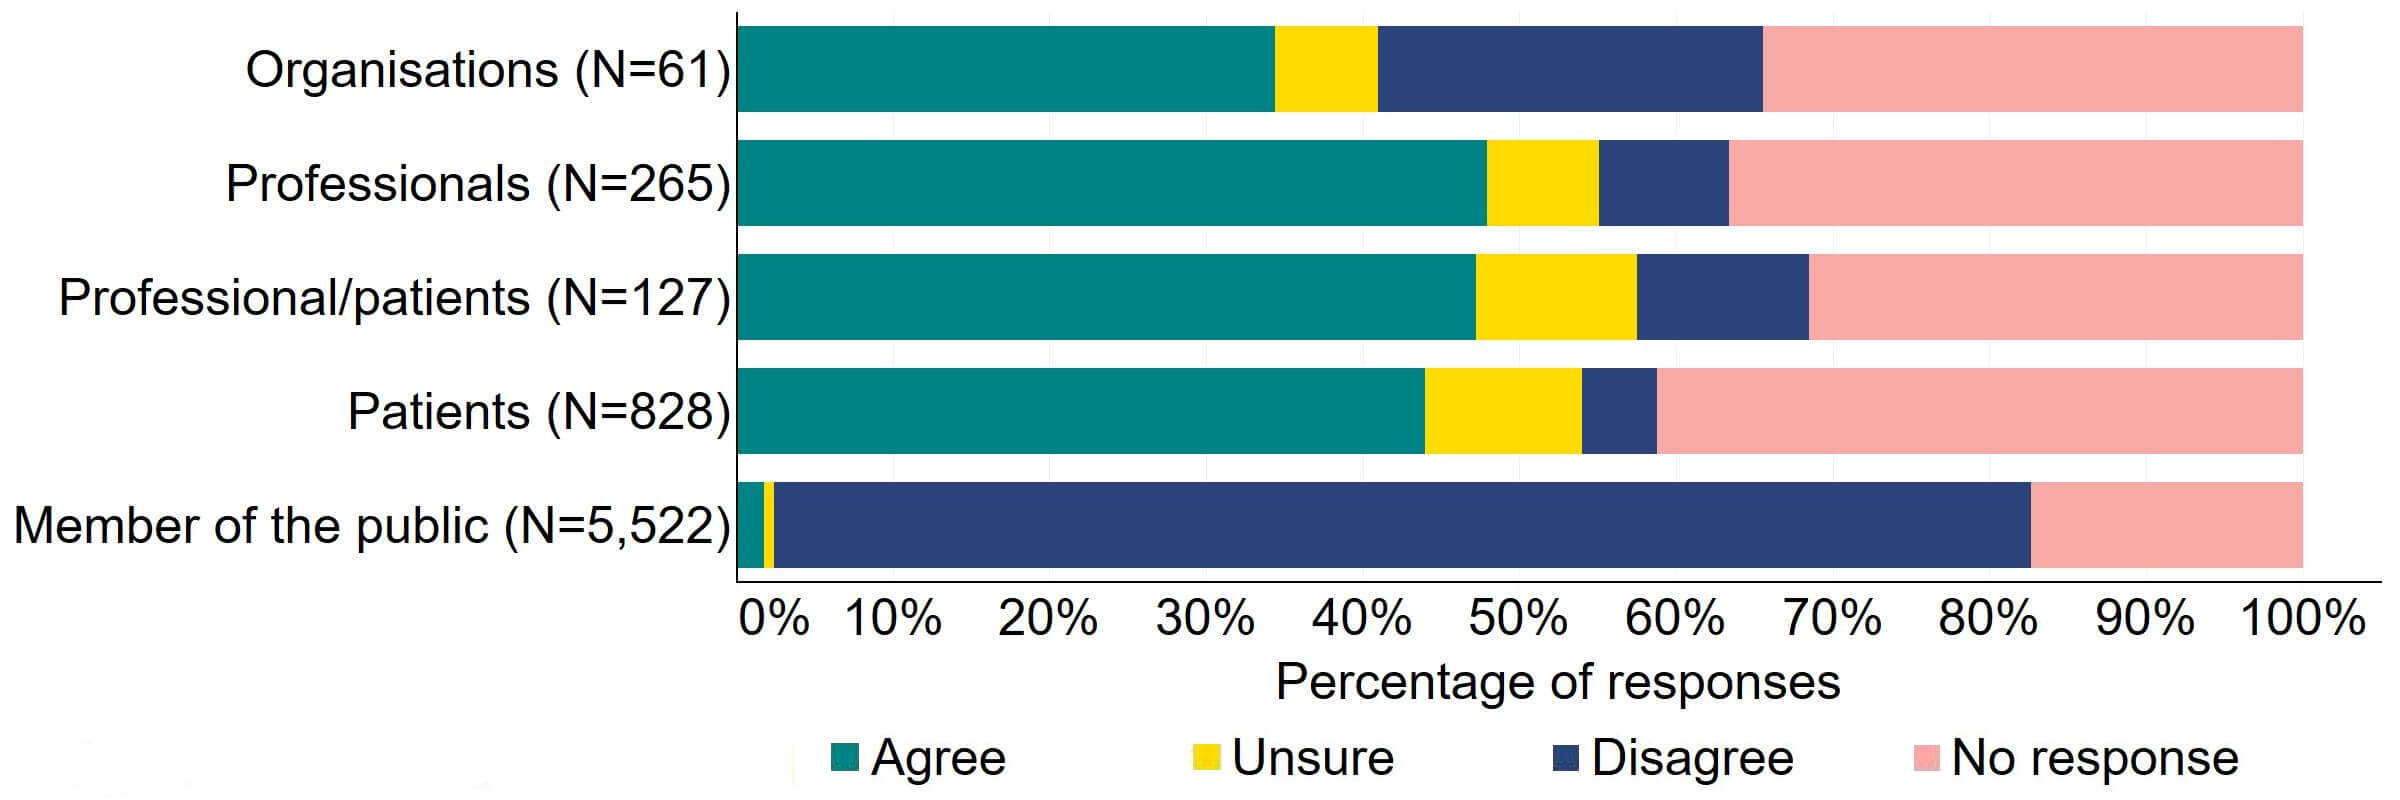 Figure 19 is a stacked bar chart showing the proportion of respondents in each response group who agreed, disagreed, were unsure, or who did not provide a response to the proposal. The underlying data can be downloaded as an Excel worksheet at the top of the page.